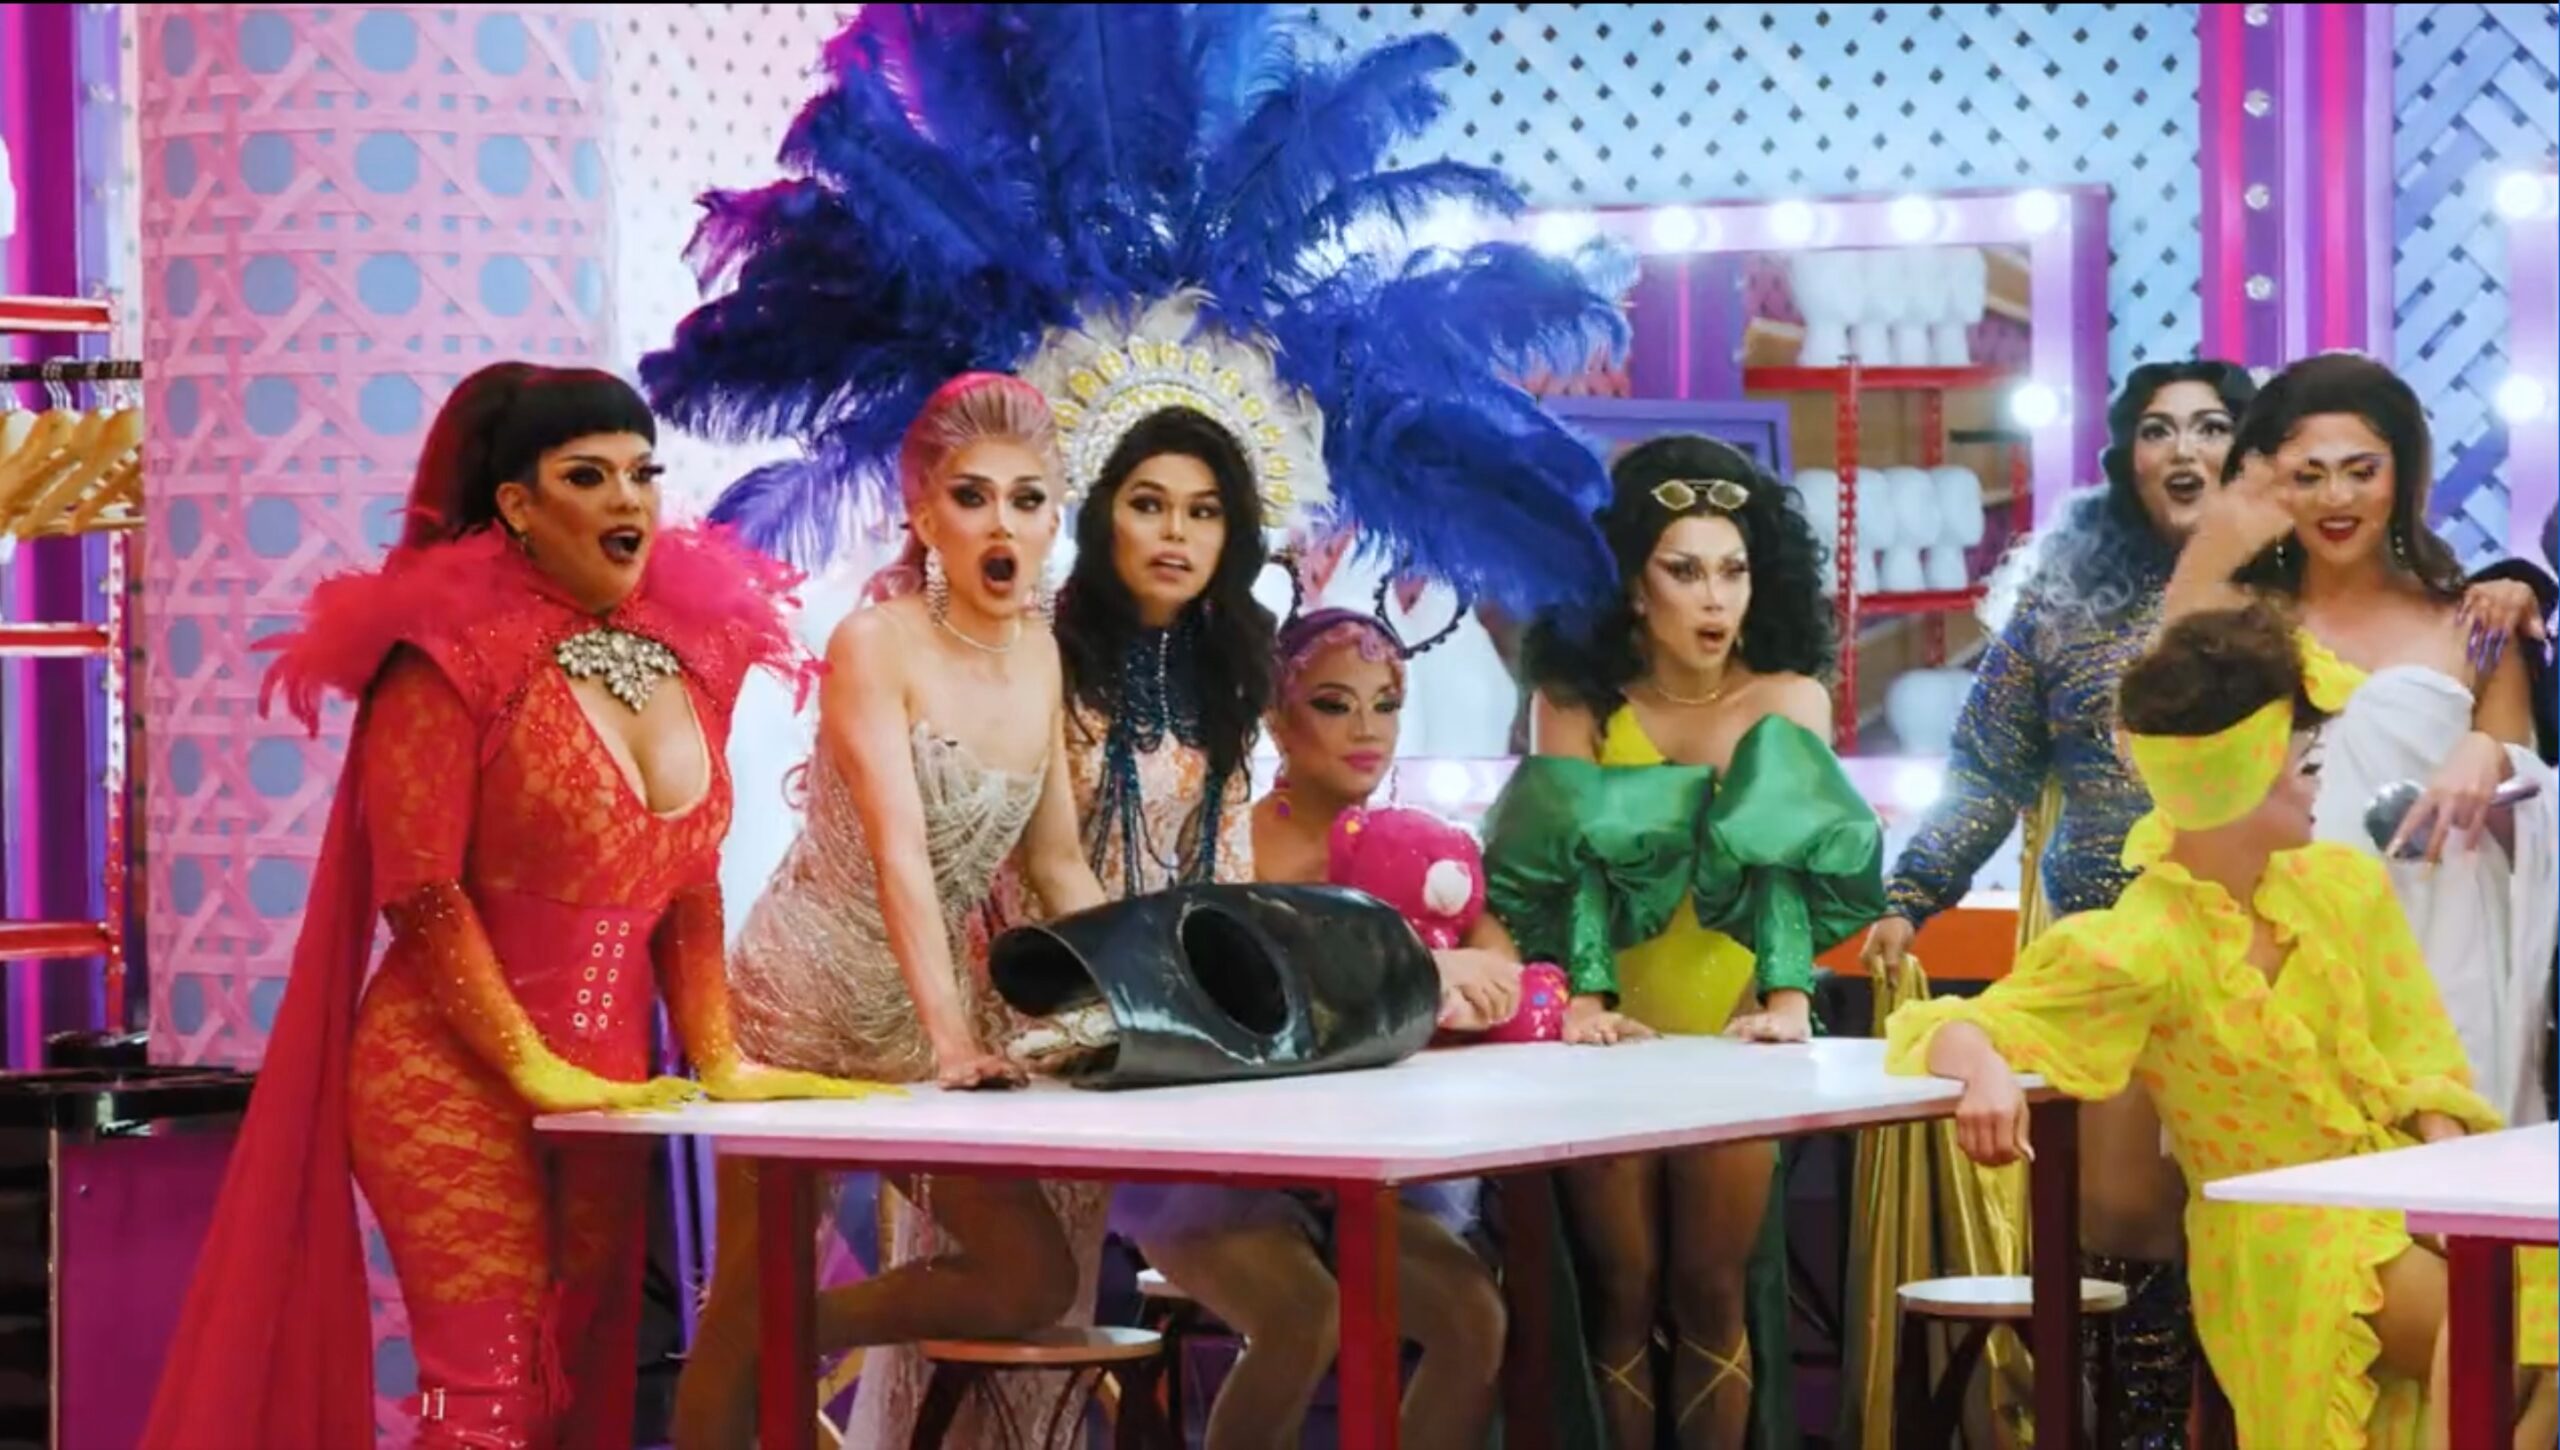 ‘Drag Race Philippines’ Episode 1 and 2 recap: TITE, Flores de Mayo, and those shoes